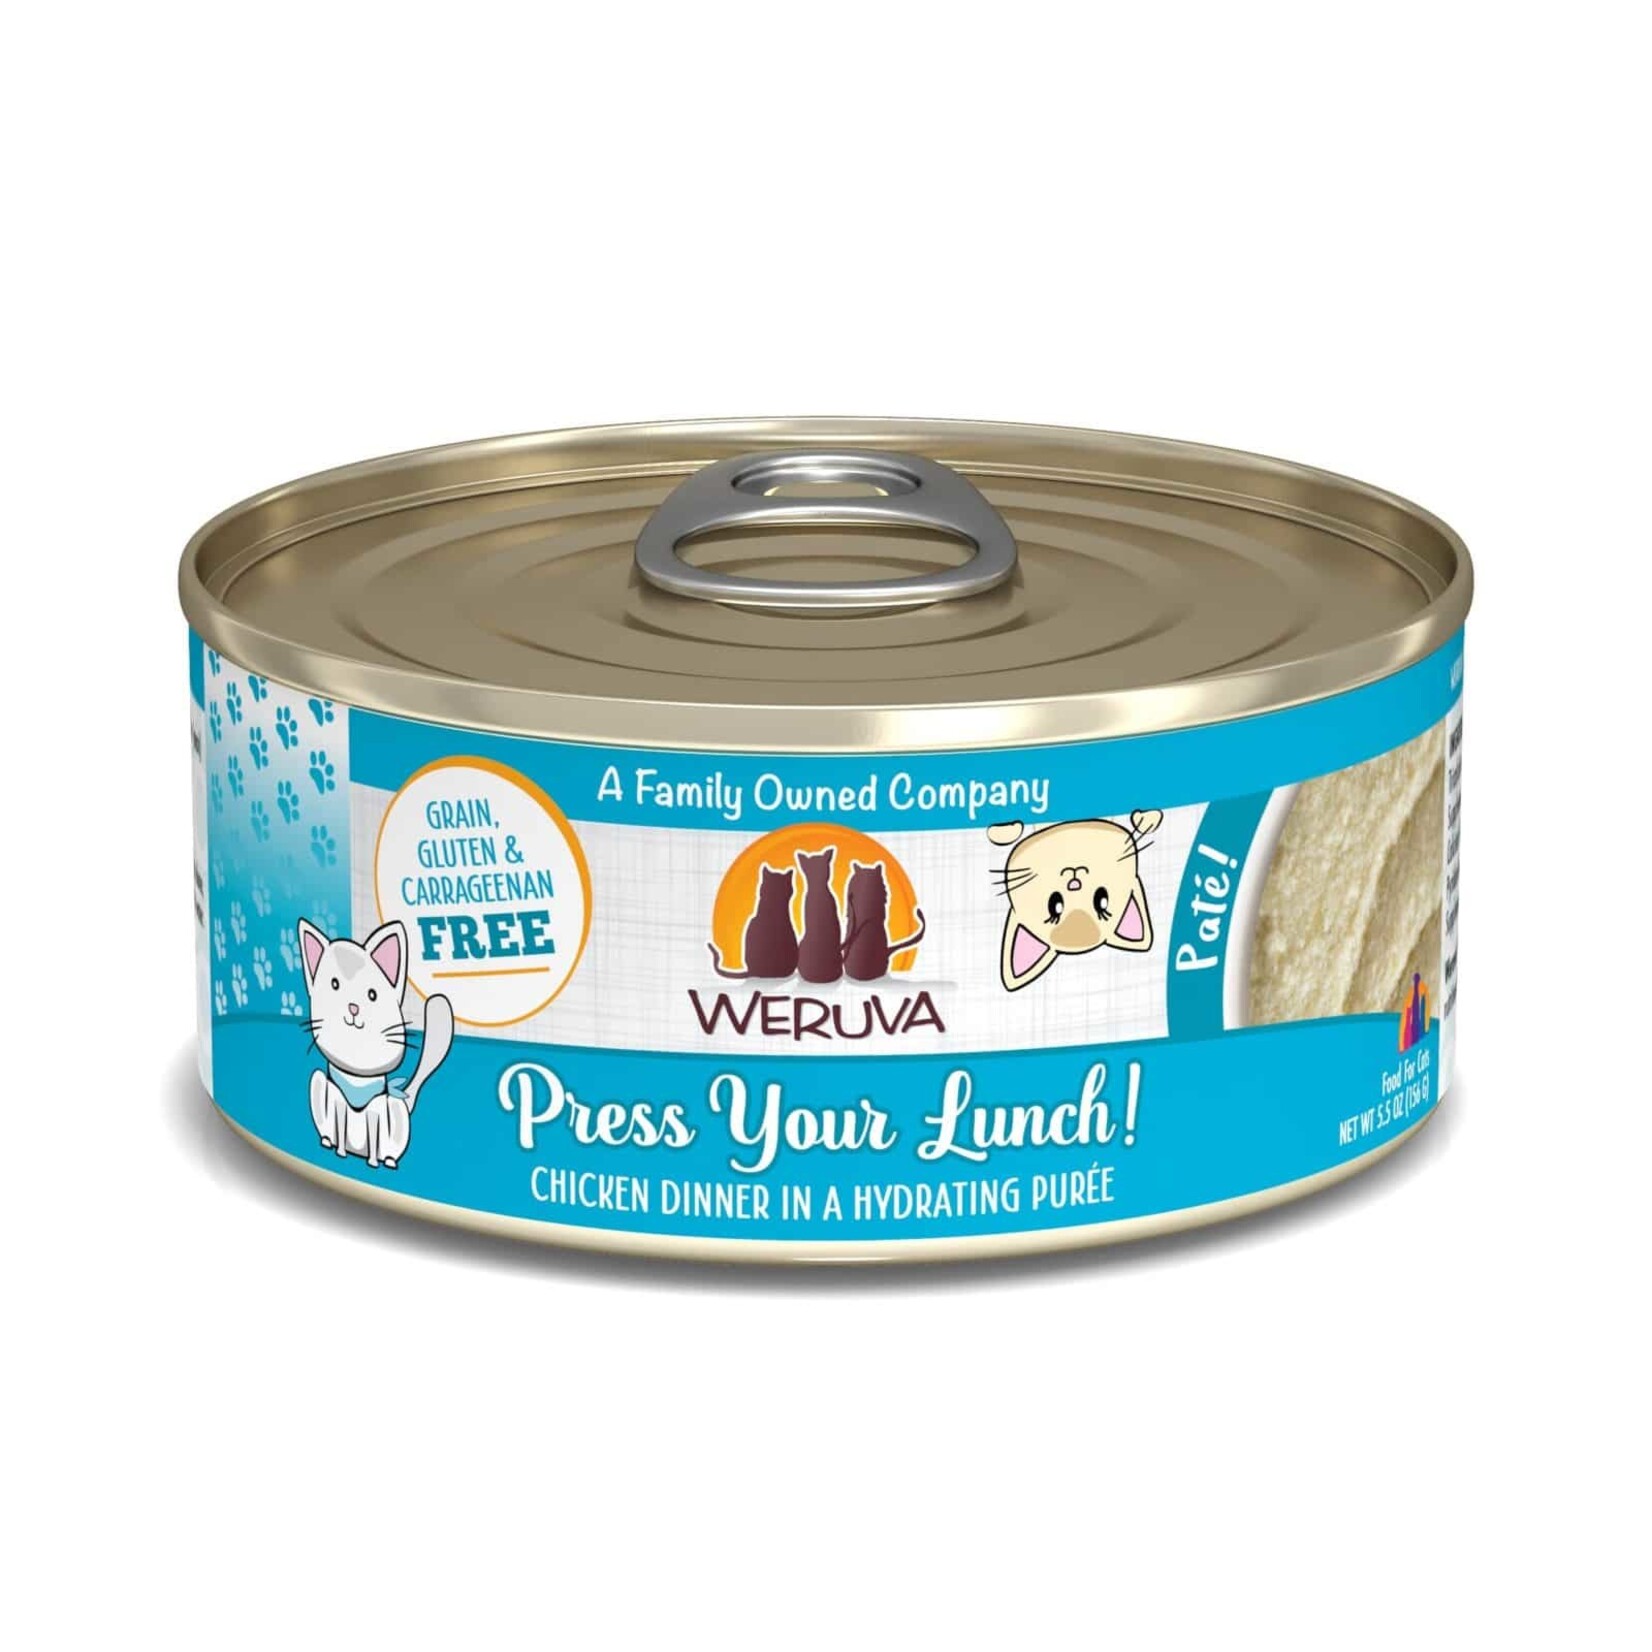 Weruva Press Your Lunch Chicken Dinner in a Hydrating Purée Wet Cat Food